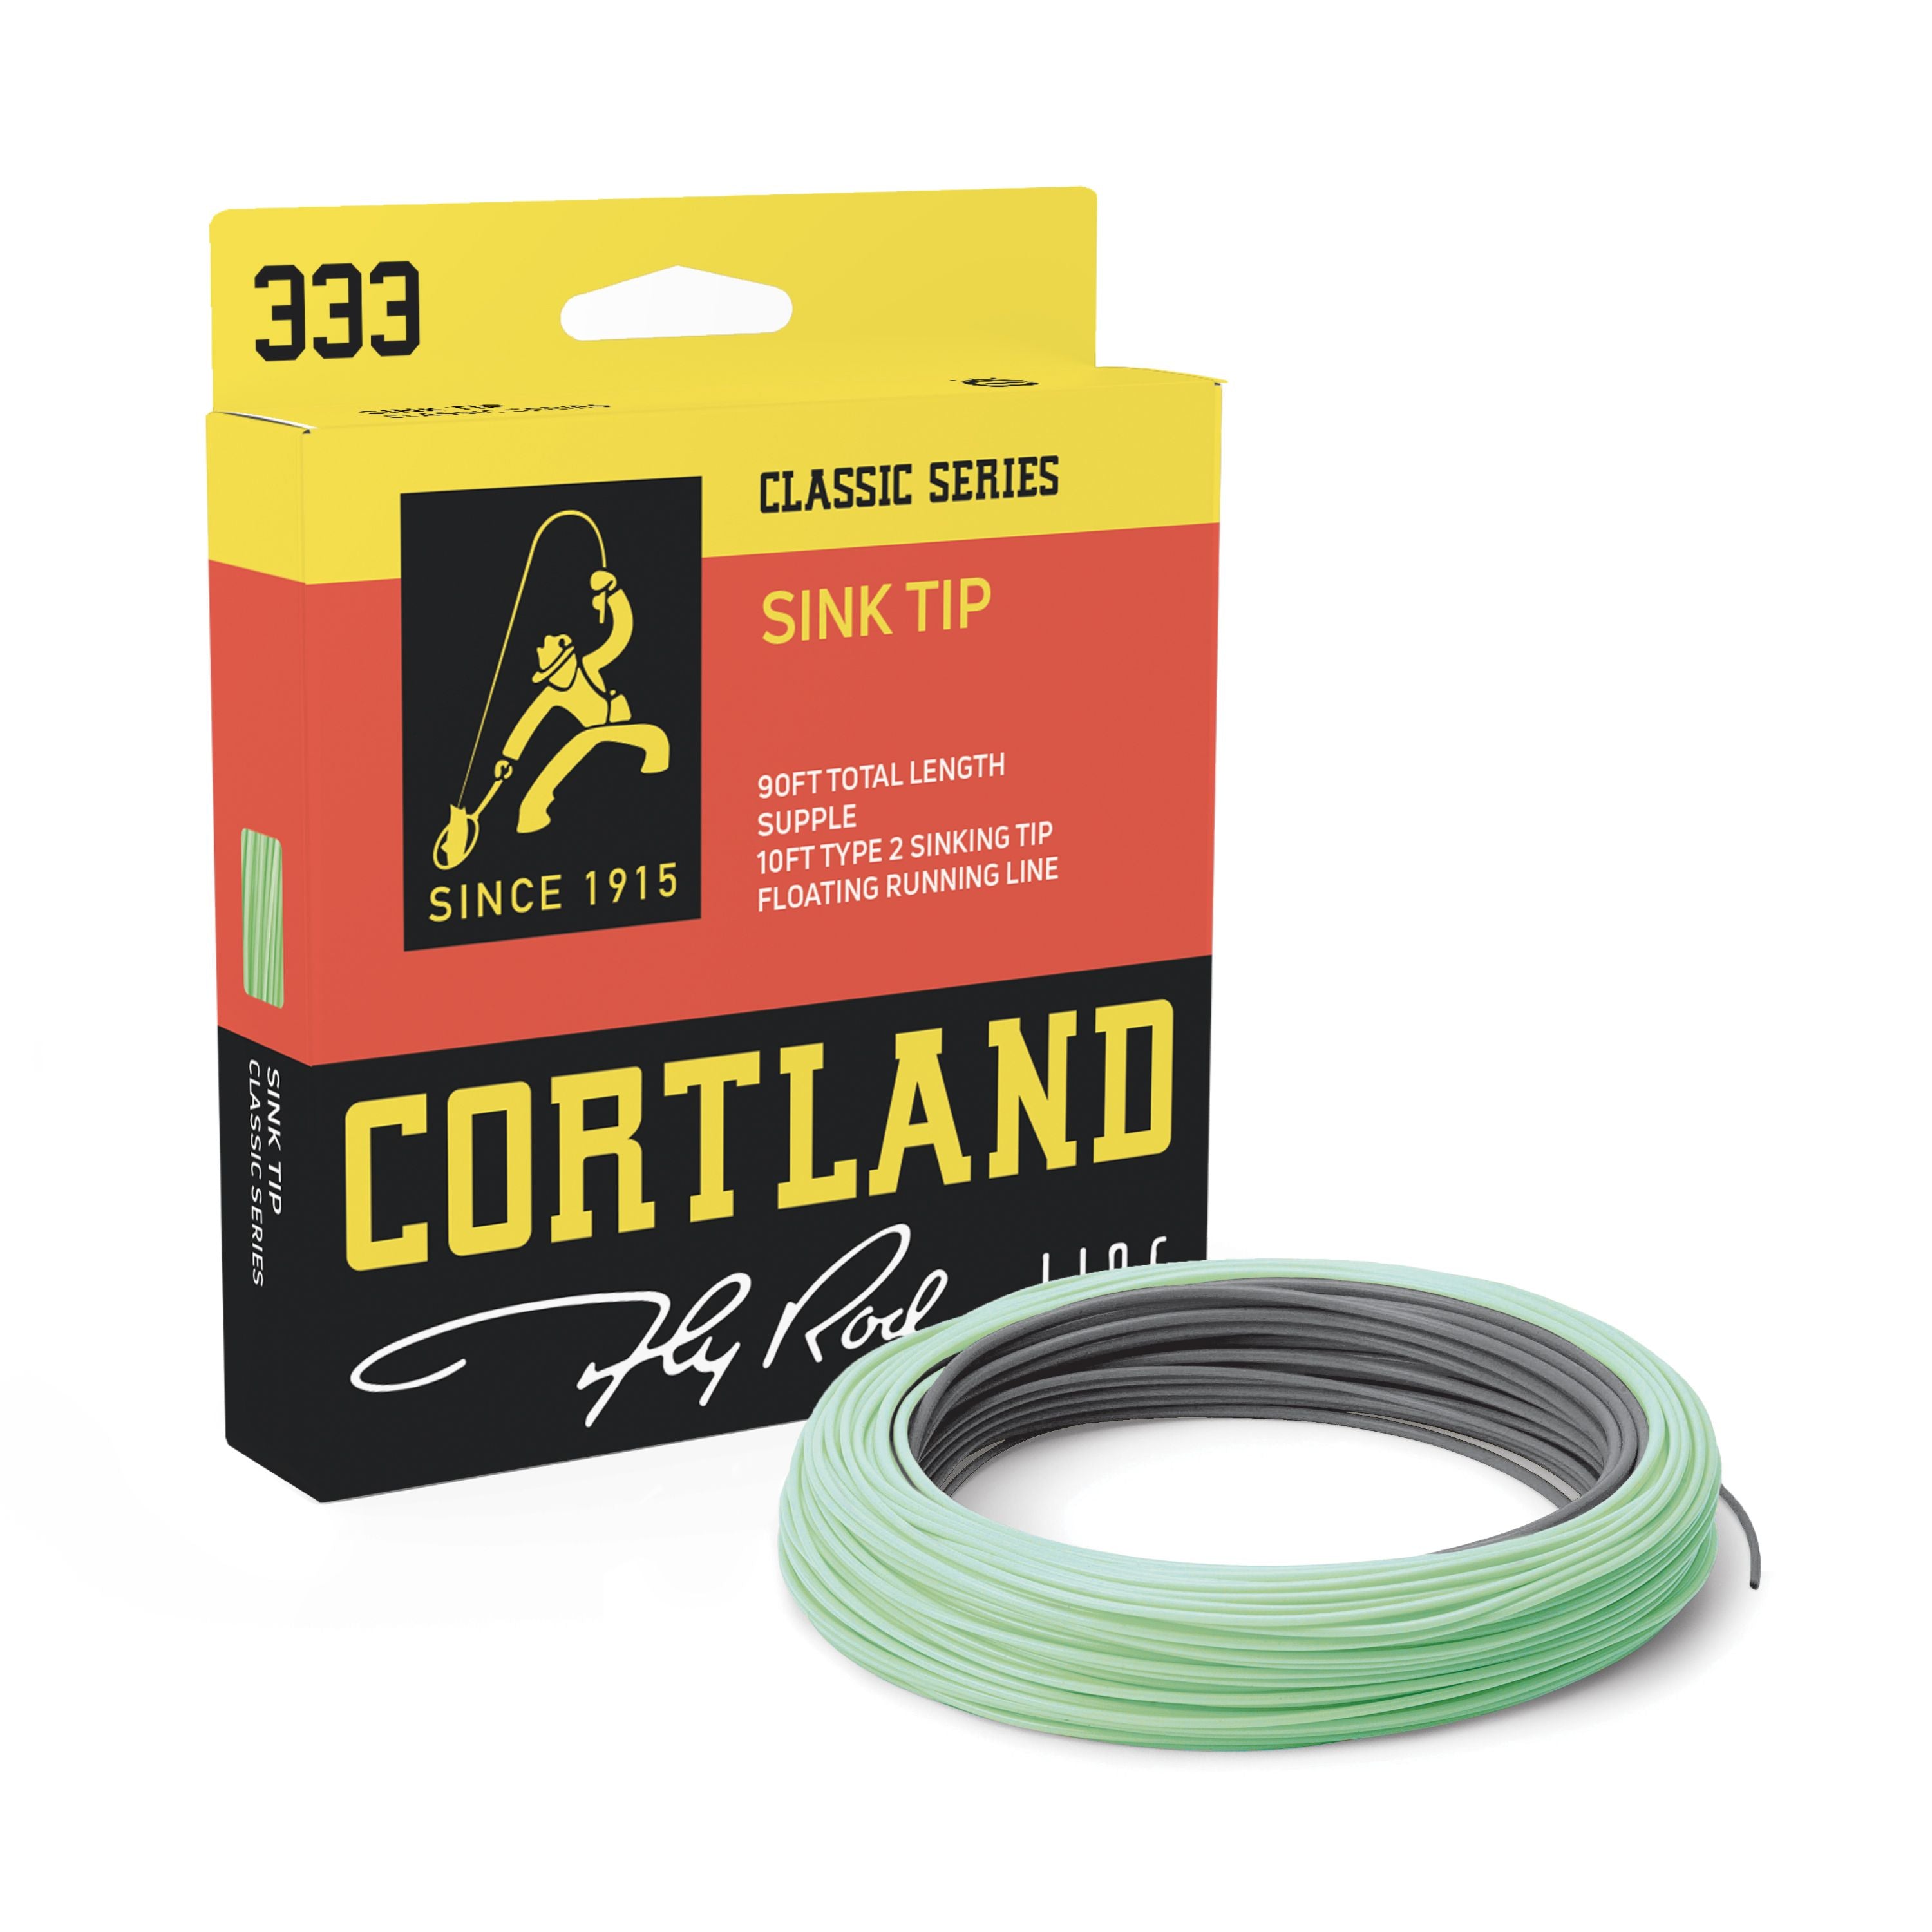 Vintage Cortland 333 Non-sinkable Nylon Fly Fishing Line Spool IN Case  Original Box 25 YDS Pristine Fly Line Cleaner Tin Rare 